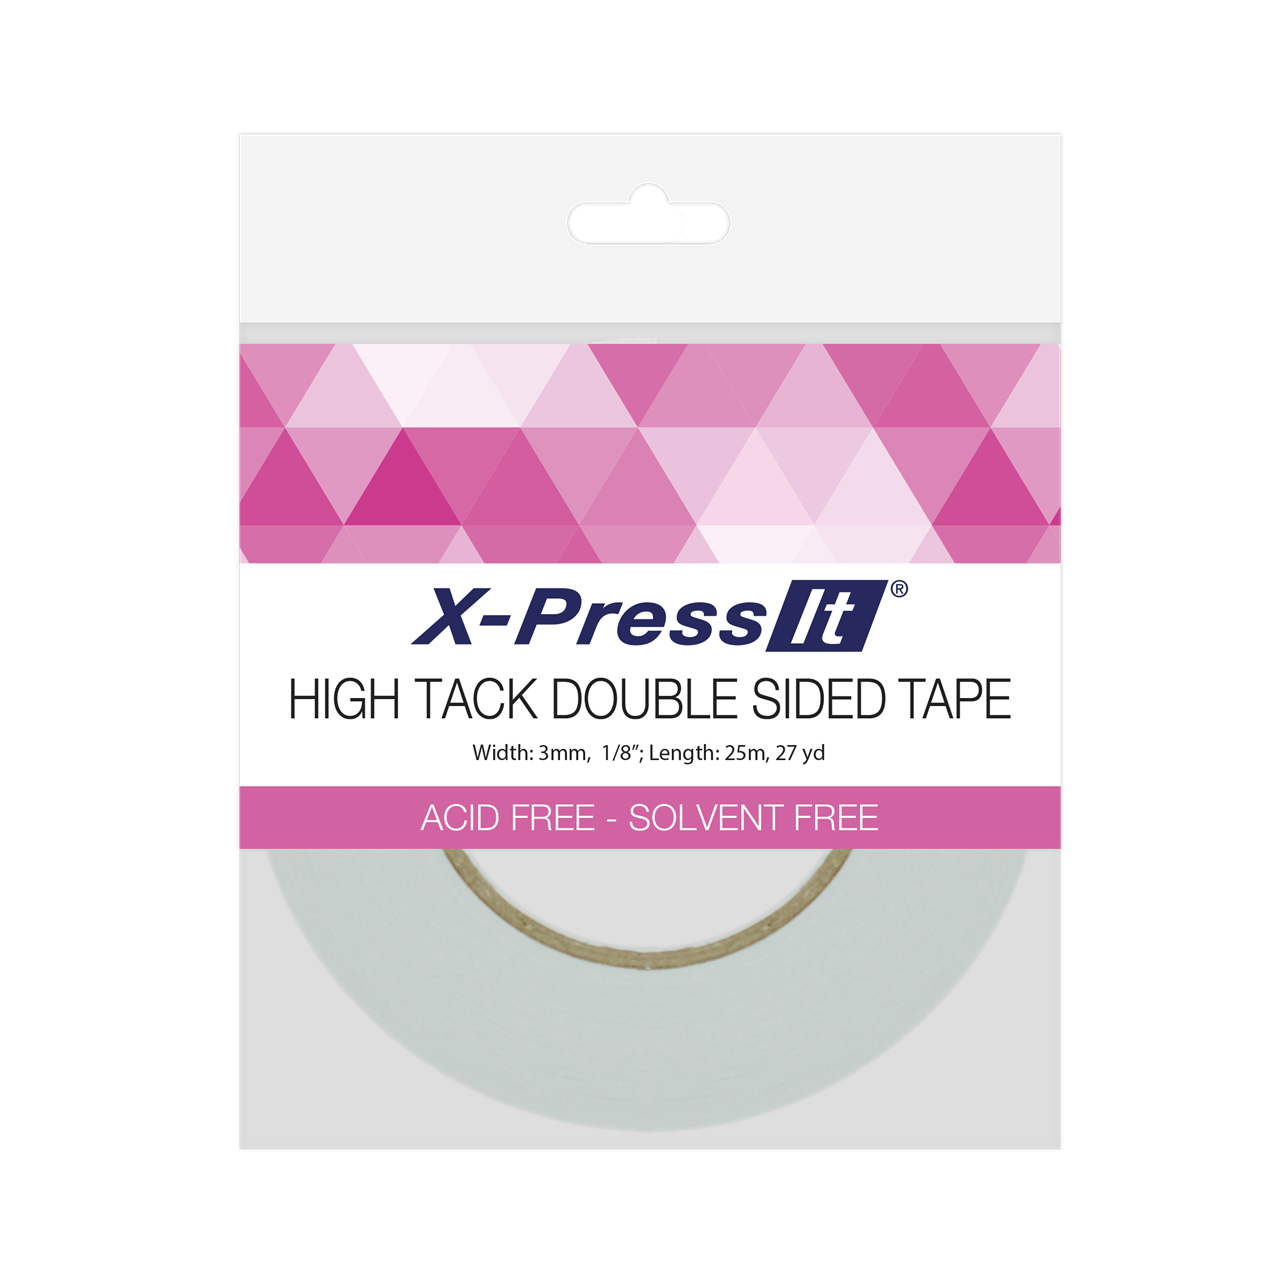 X-Press it Double Sided Tape- High Tack- 3mm